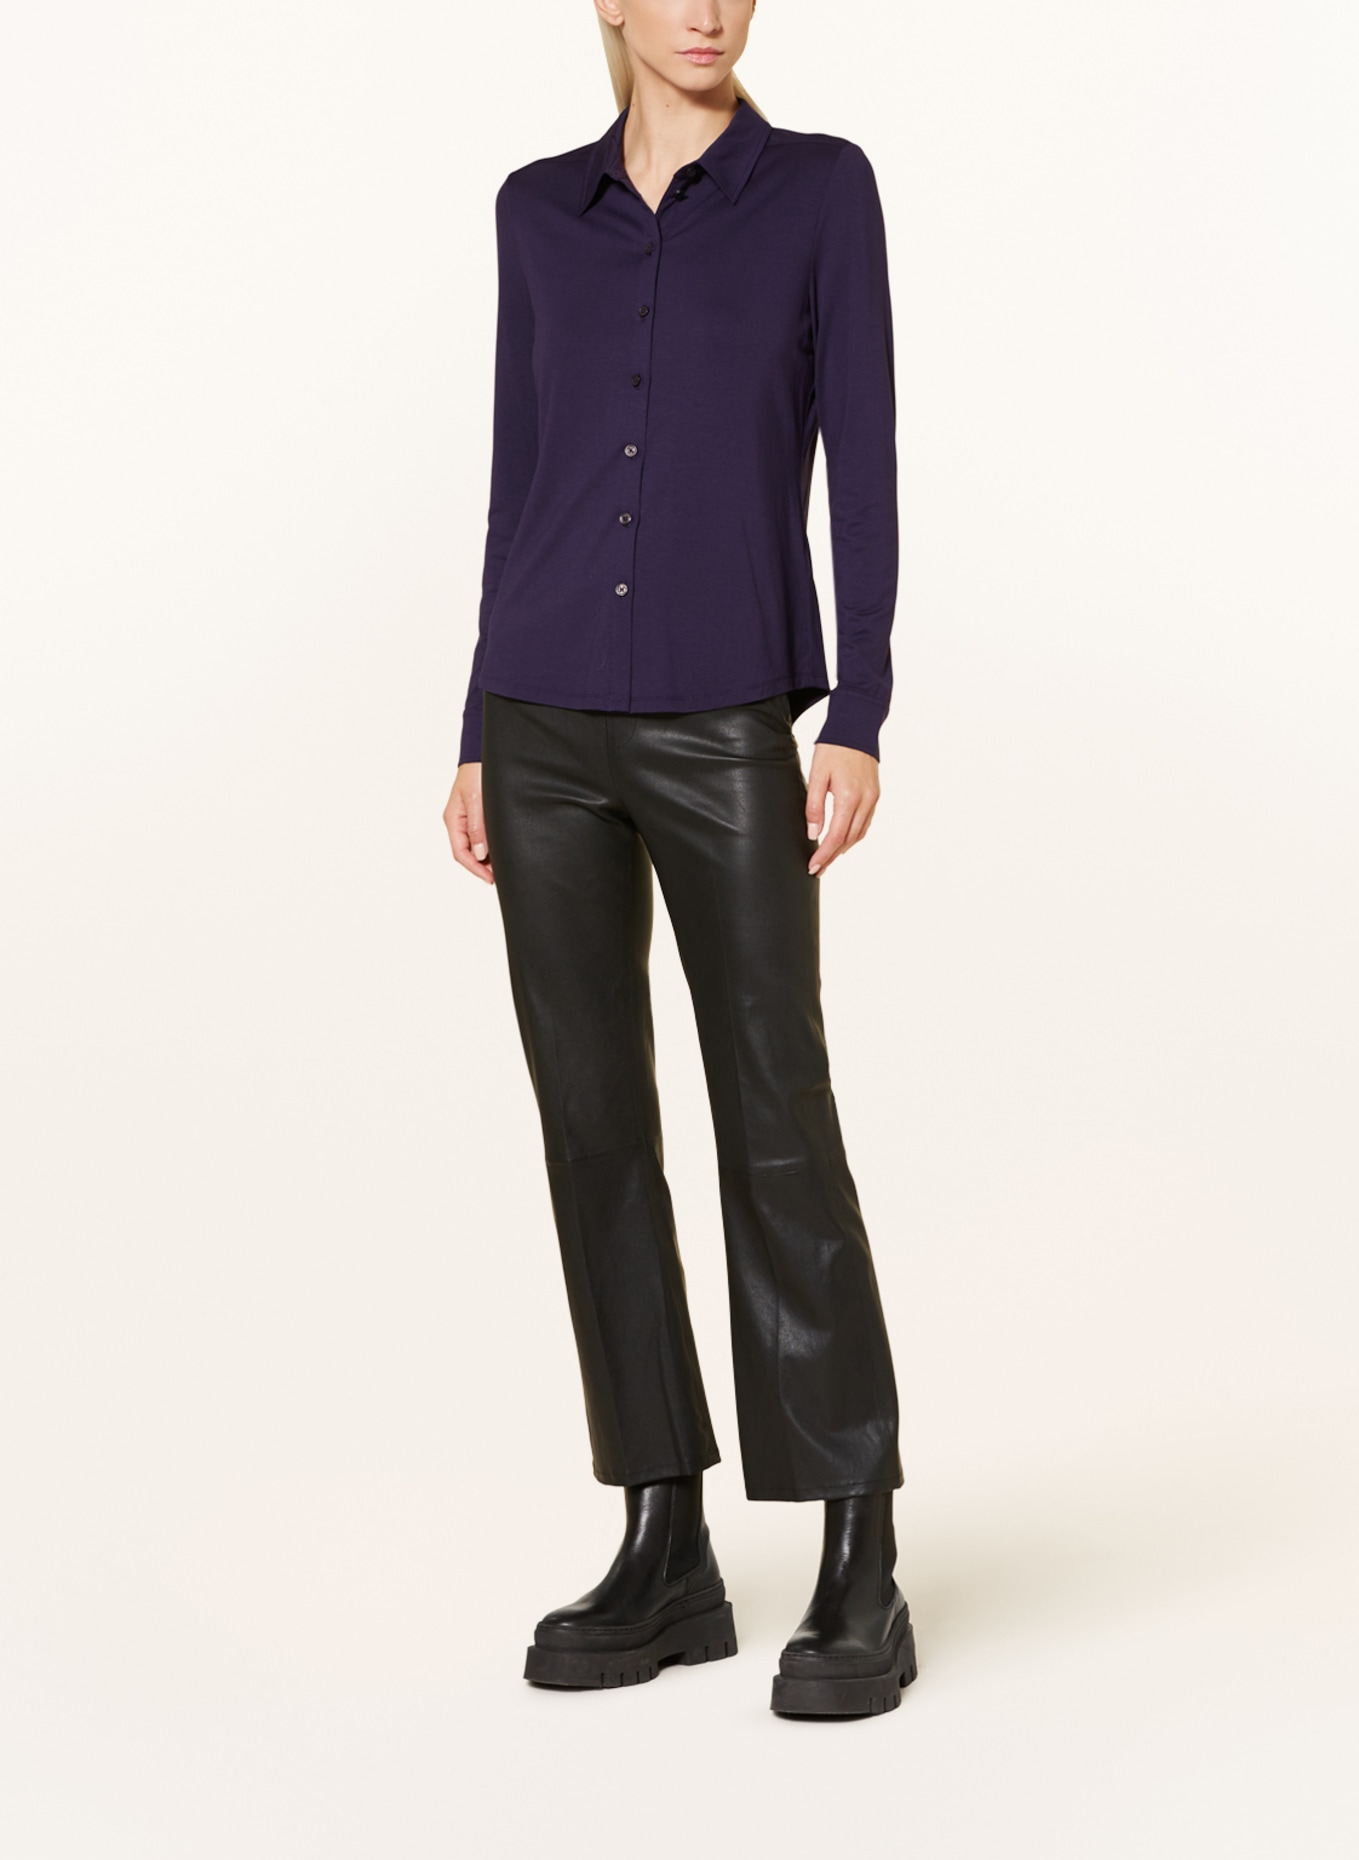 Marc O'Polo Shirt blouse made of jersey, Color: DARK PURPLE (Image 2)